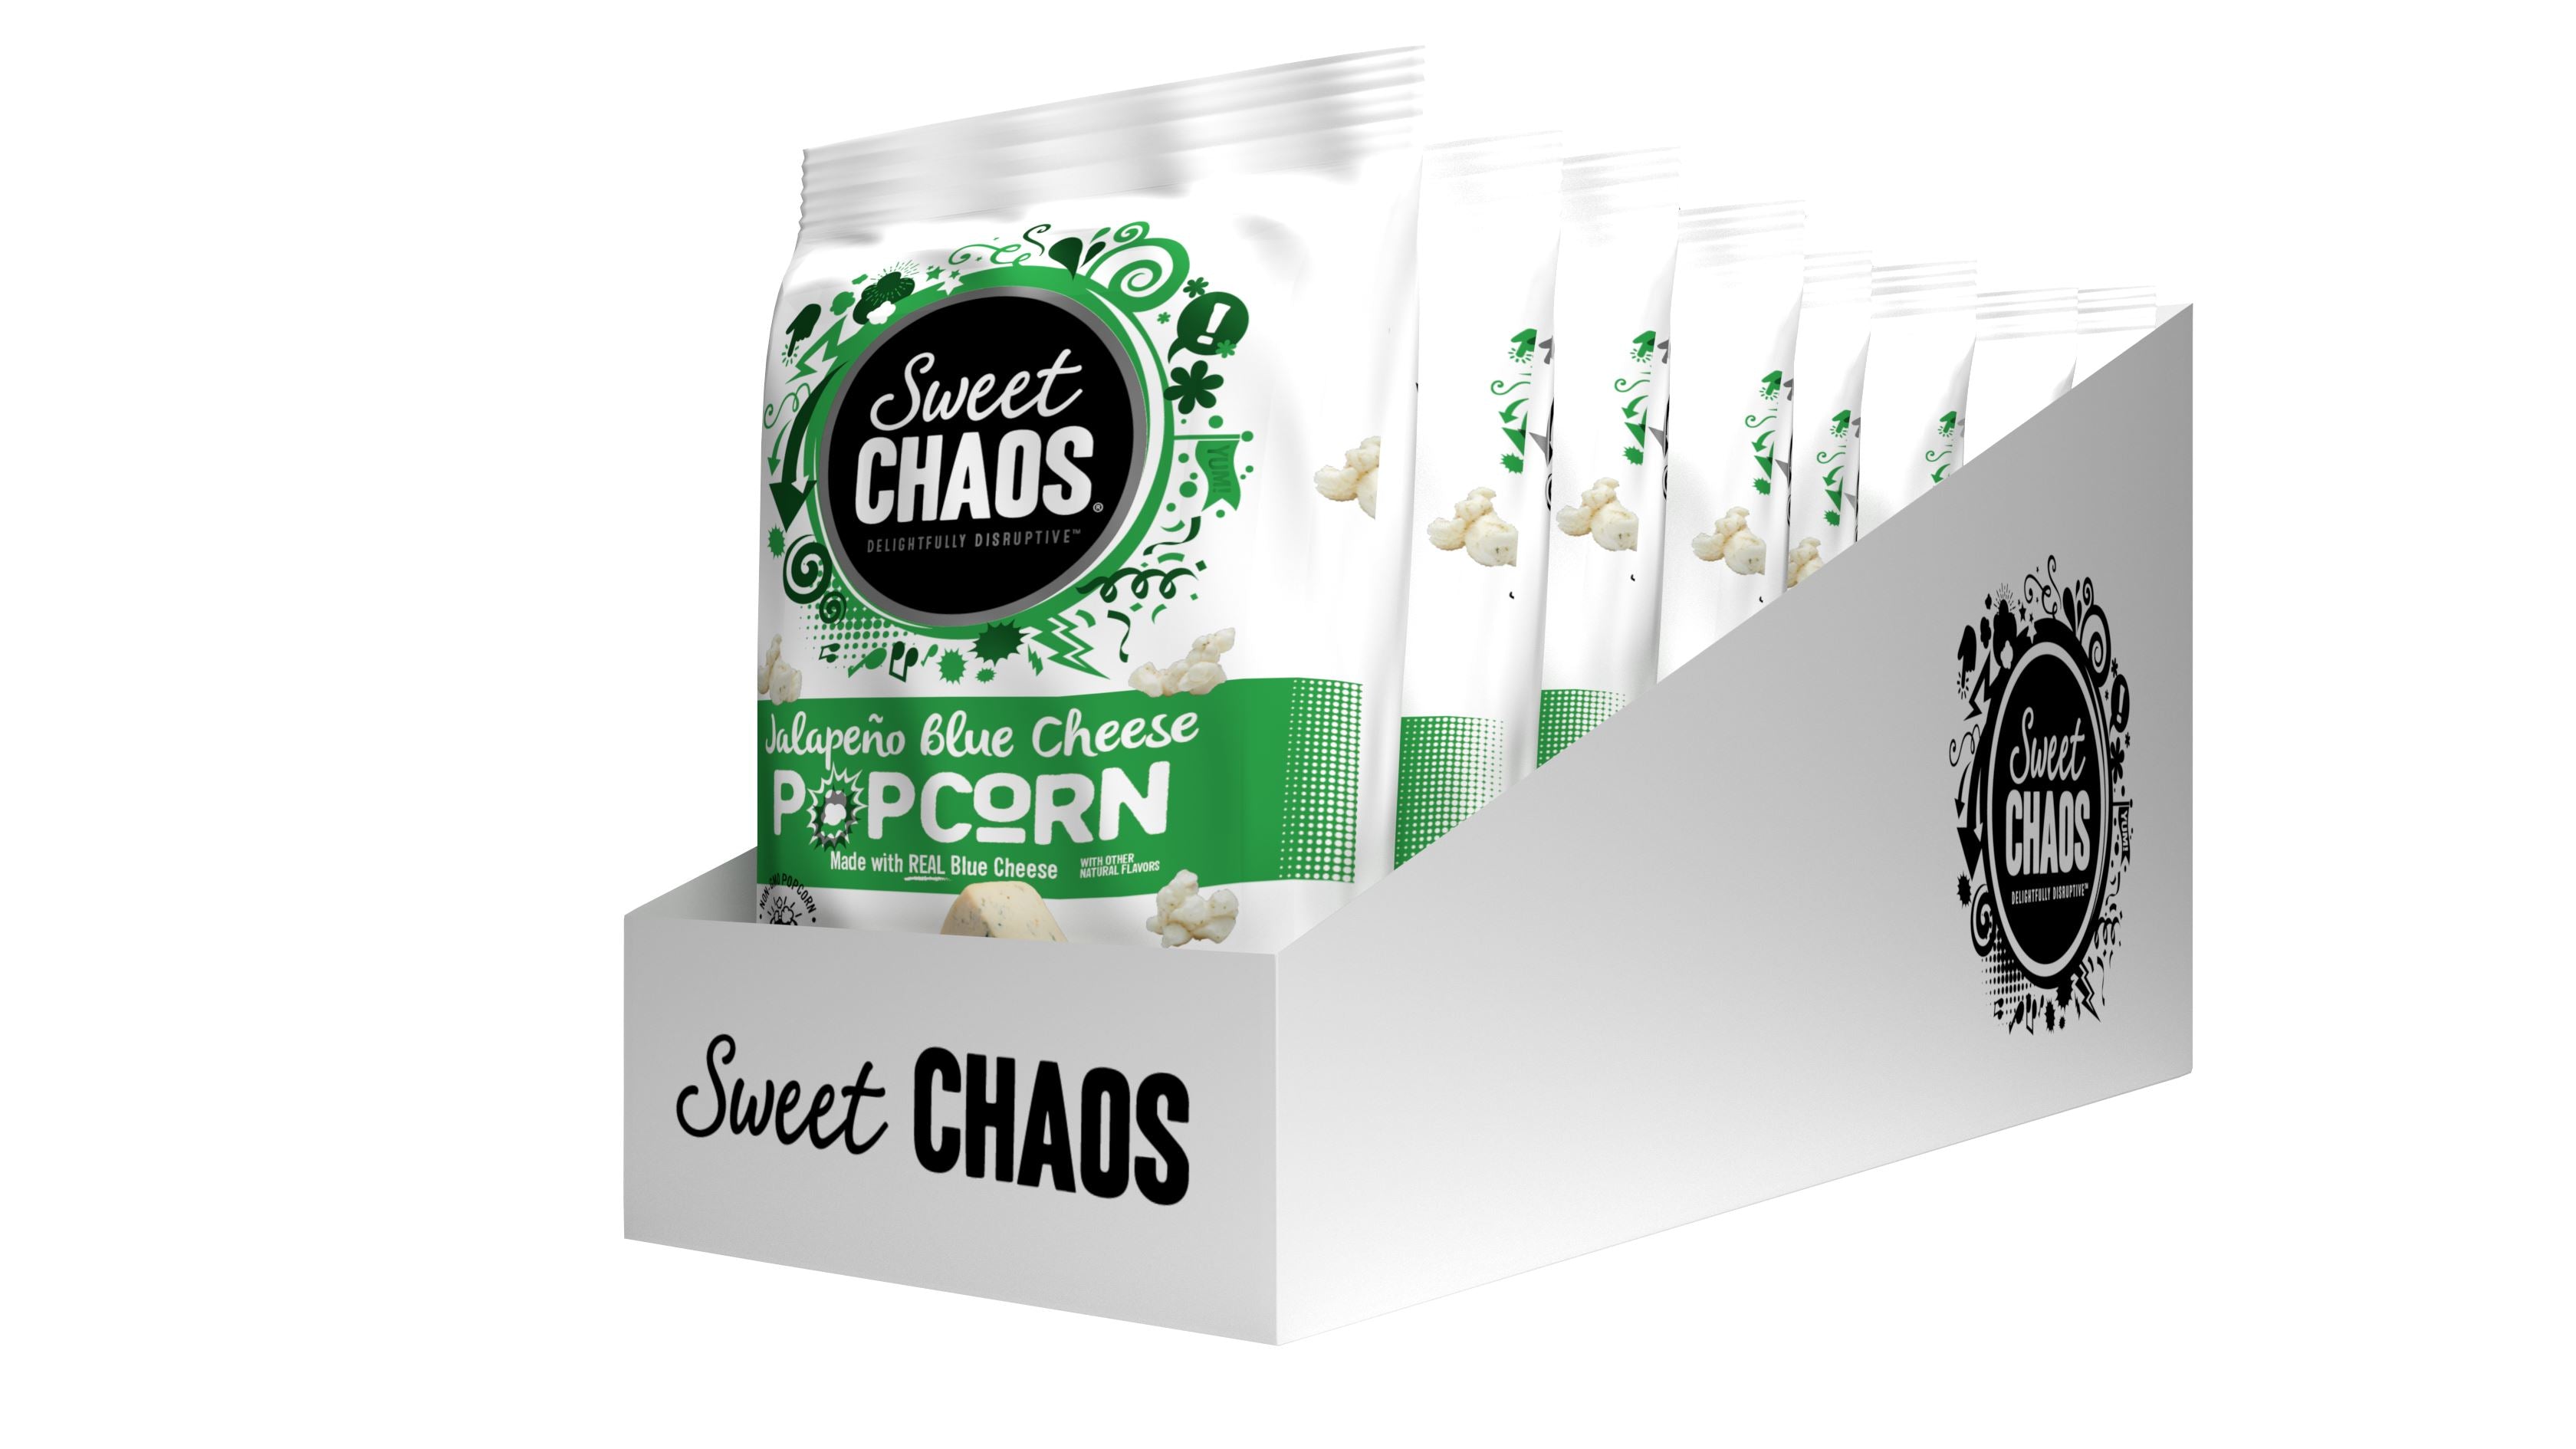 Sweet Chaos Drizzled Popcorns Sweet Chaos Jalapeno Blue Cheese 1.5 Oz-8 Count 